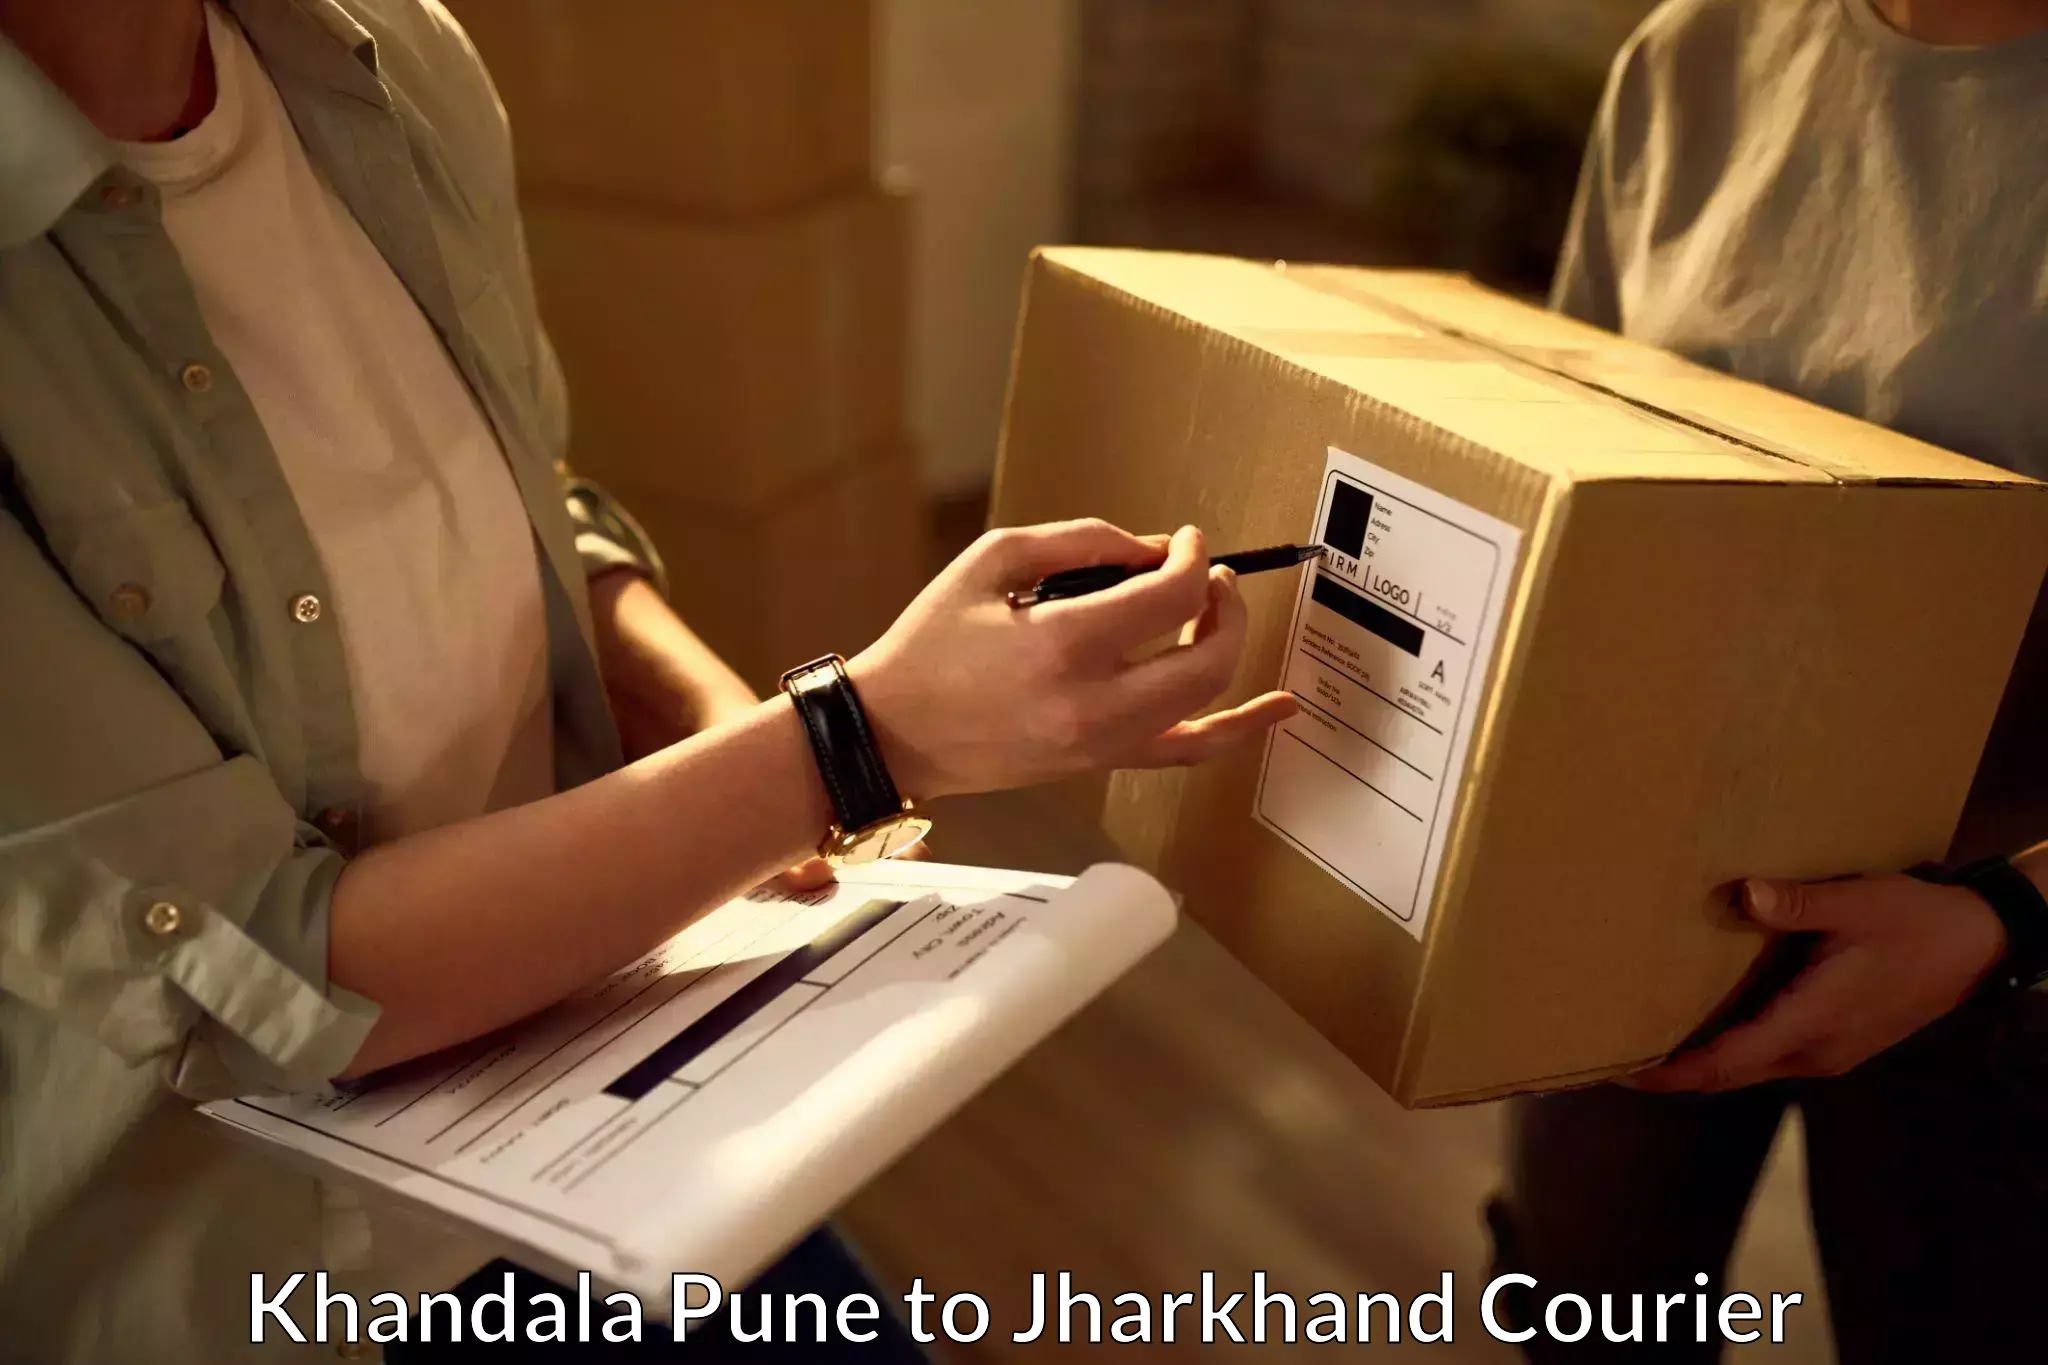 Premium courier services in Khandala Pune to Jharkhand